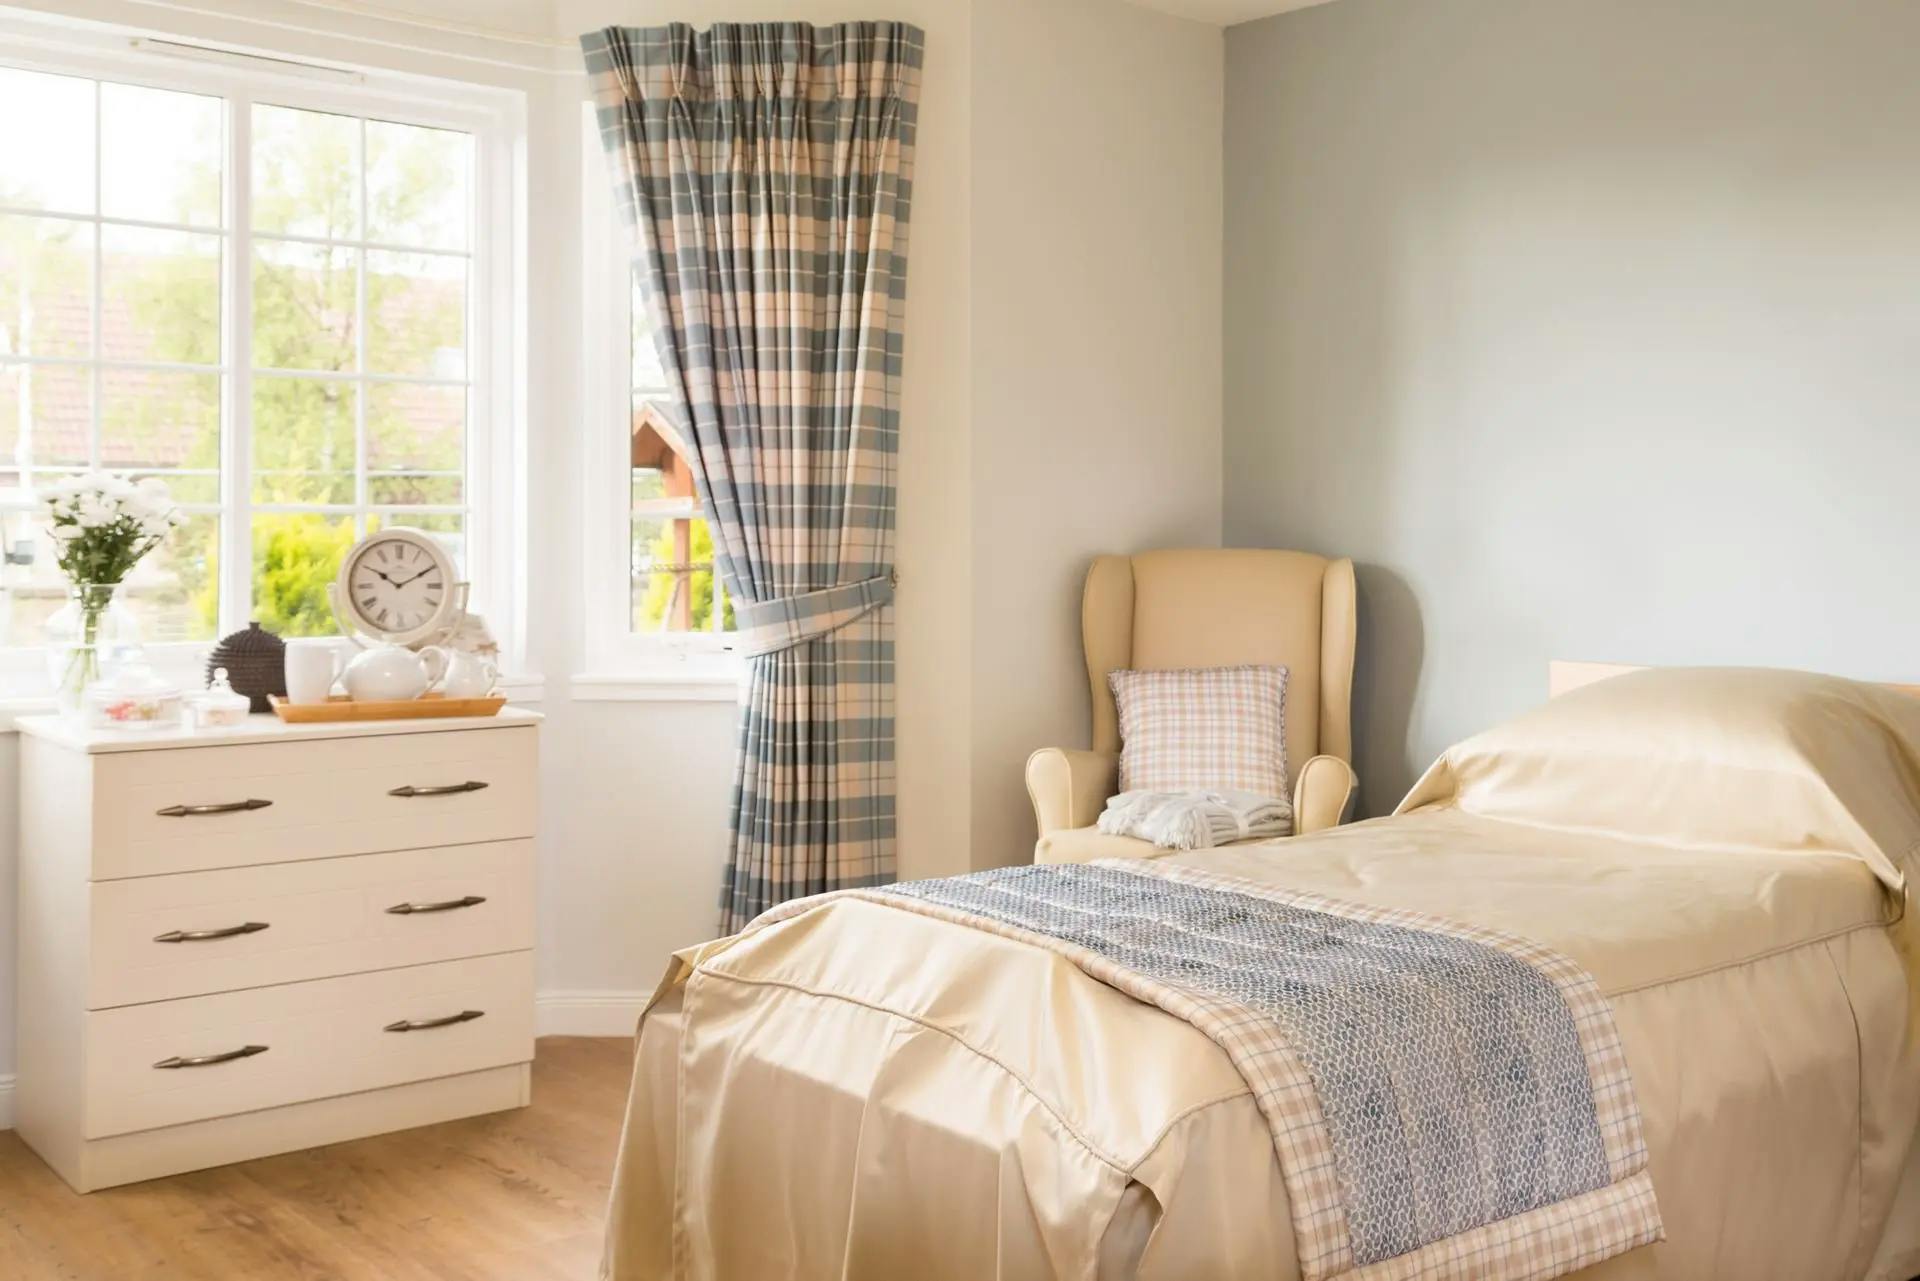 Bedroom at Forth Bay Care Home in Alloa, Fife